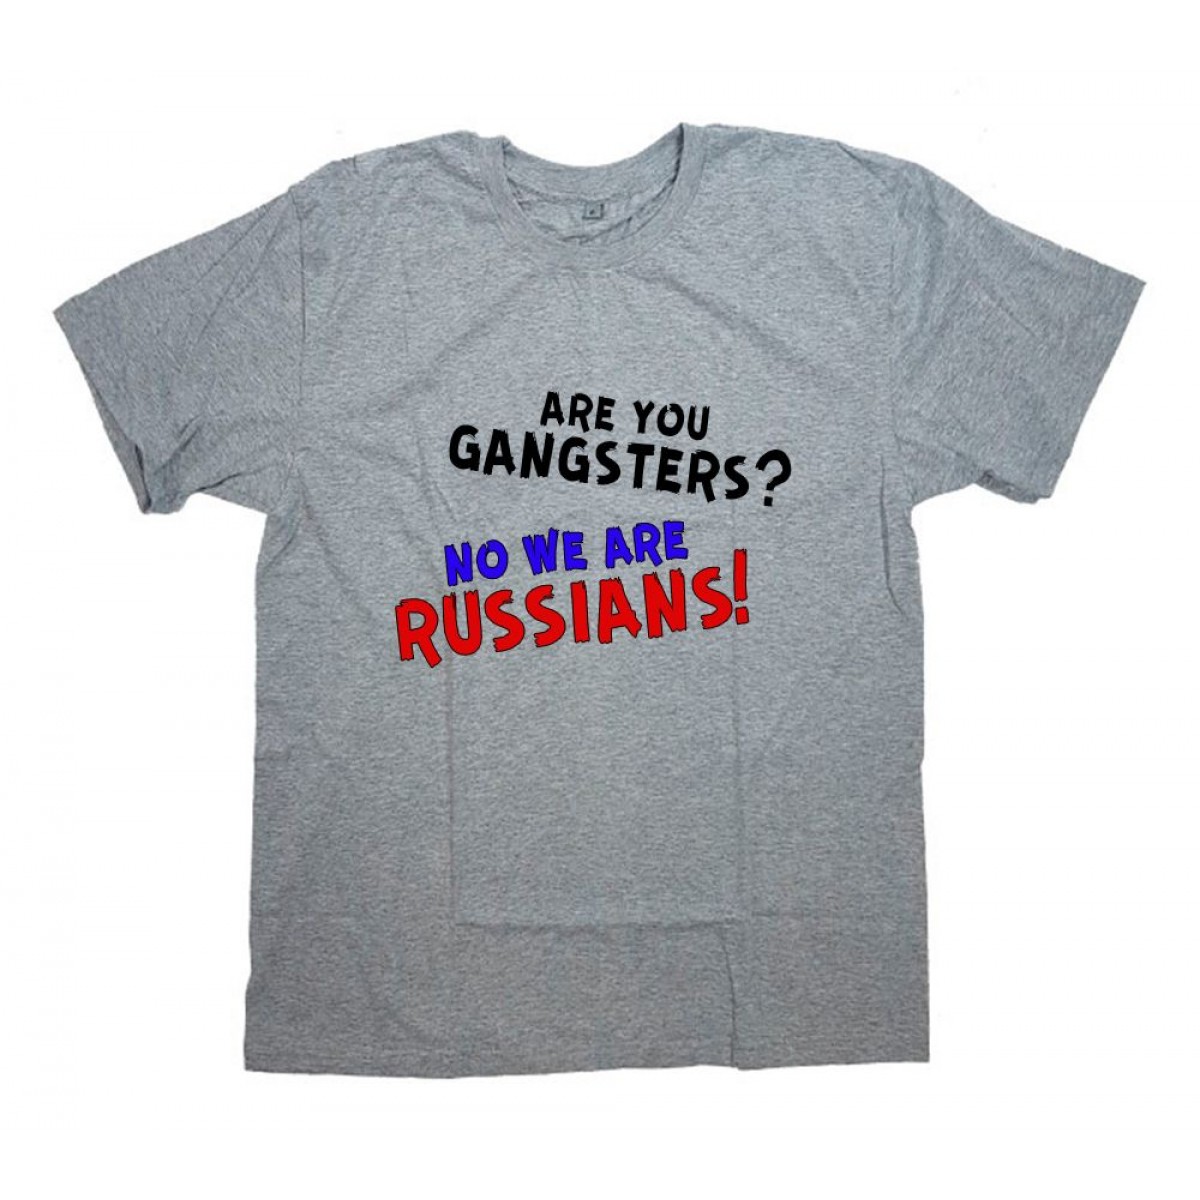 We are Gangsters no we are Russians футболка. Are you Gangsters no we are Russians футболка. Футболки с гангстерскими надписями. Футболка are you Gangsters. Russia we are coming